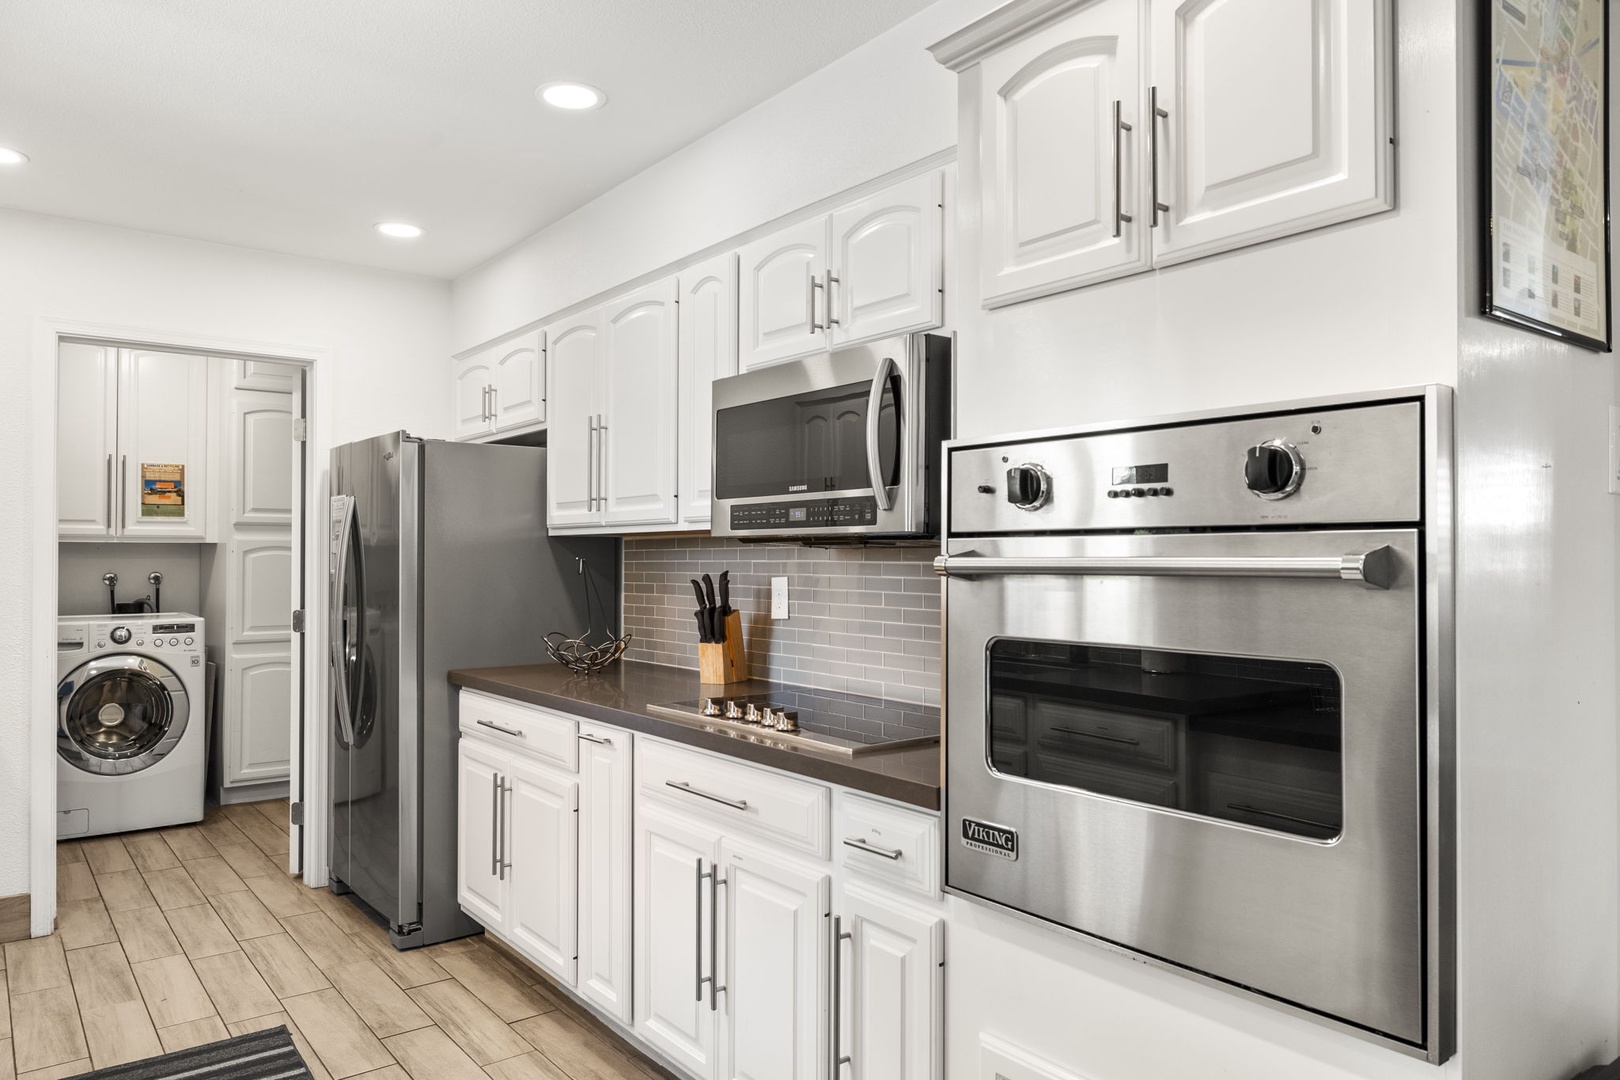 Kitchen has modern stainless steel appliances including: dishwasher, fridge, stove top, coffee maker, pots and pans, and utensils.